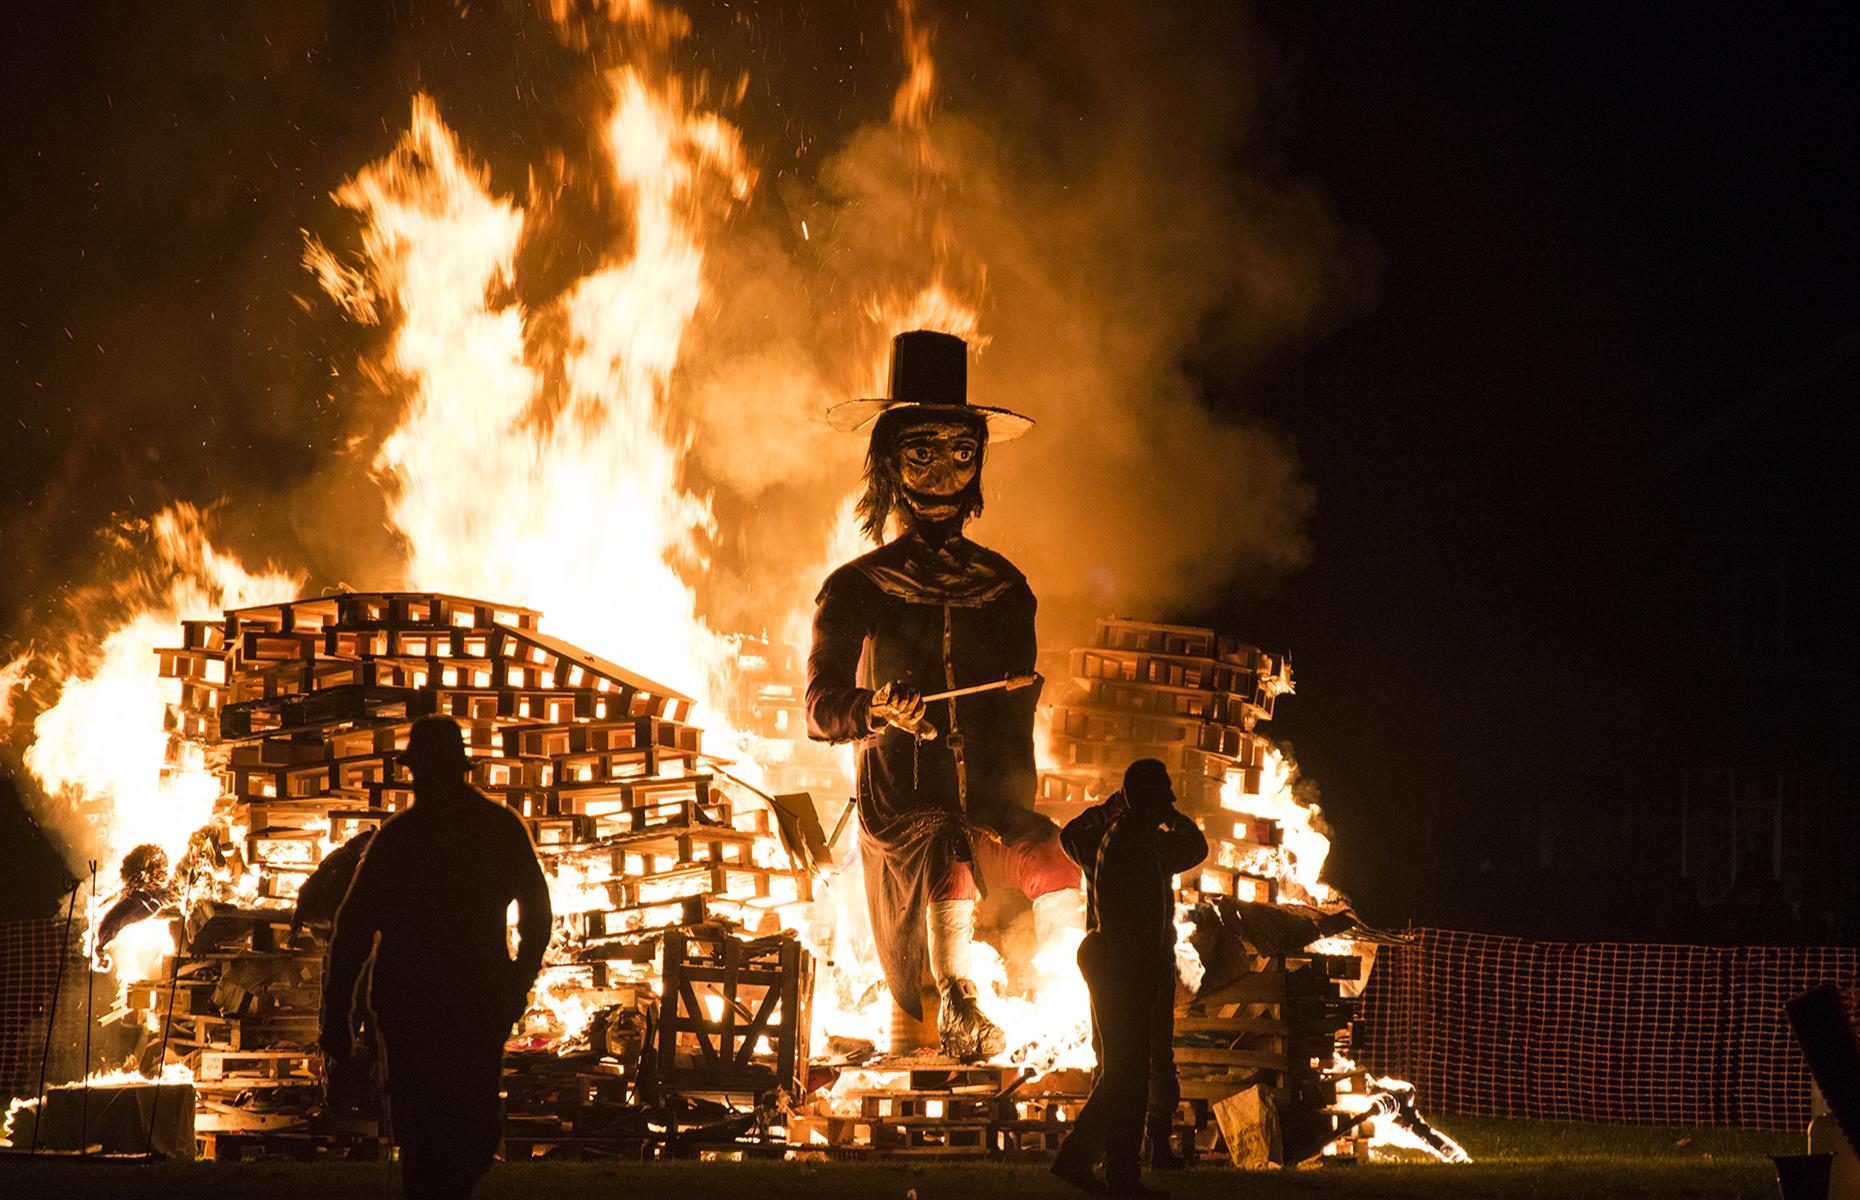 <p>Bonfire, or Guy Fawkes, night sees effigies of Fawkes, who famously failed to blow up parliament in 1605, burnt on a bonfire to rapturous applause. Many a Brit will merrily celebrate this event each November without pausing to consider how bizarre the whole concept is.</p>  <p>Visitors whose trip coincides with the festivities will be rightly amused. Head to <a href="https://www.loveexploring.com/news/72117/things-to-do-in-lewes-east-sussex">Lewes</a> for the best show, in which thousands of robed people take to the streets with burning crosses and effigies of politicians.</p>